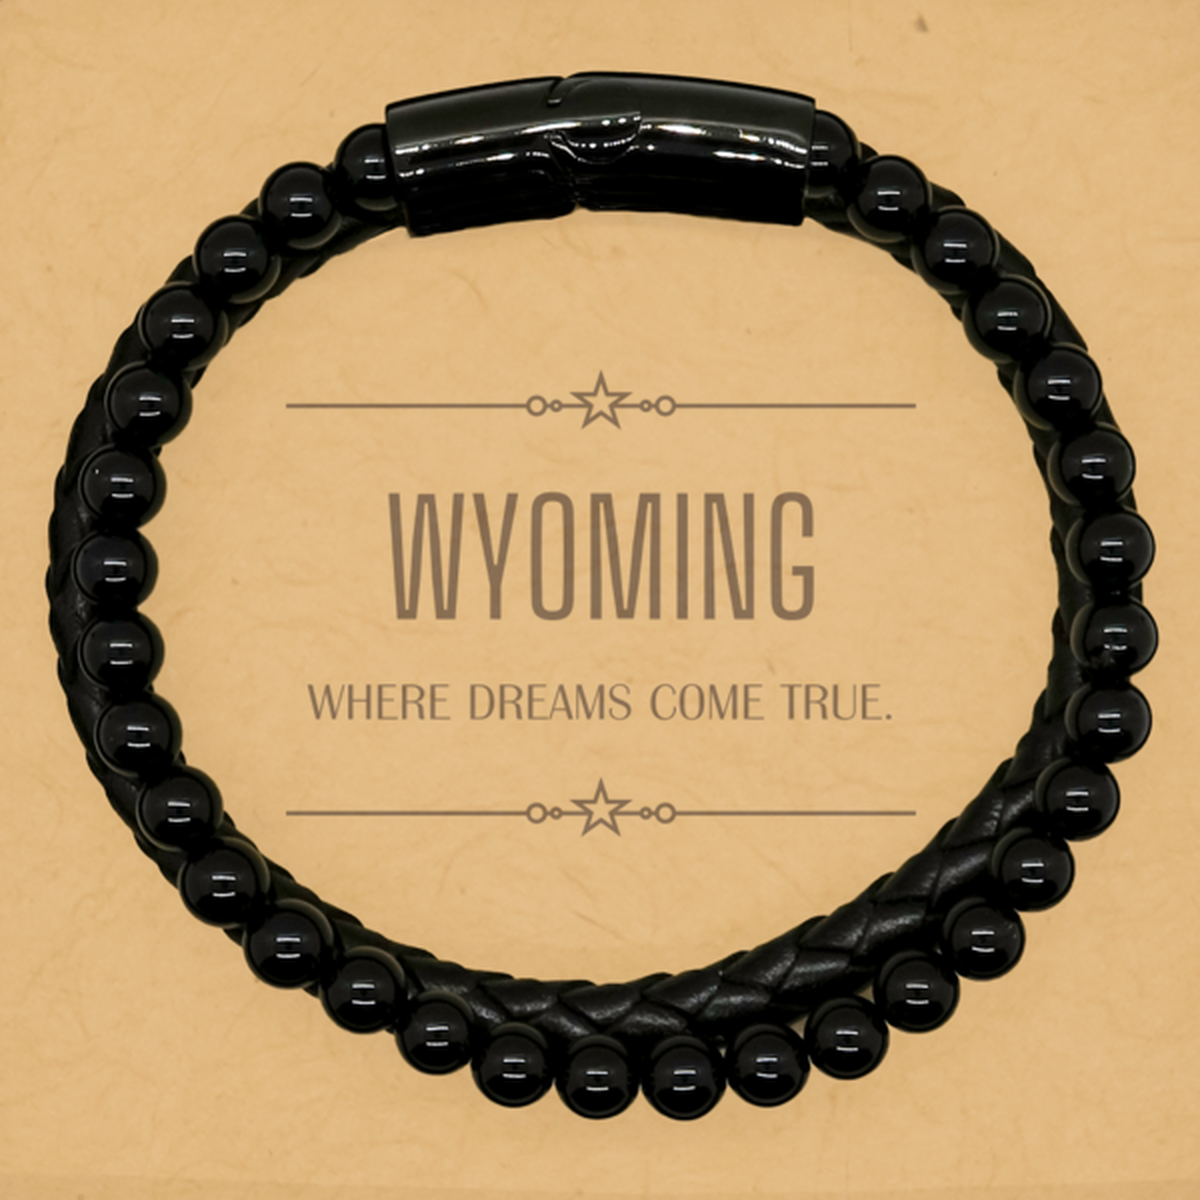 Love Wyoming State Stone Leather Bracelets, Wyoming Where dreams come true, Birthday Inspirational Gifts For Wyoming Men, Women, Friends